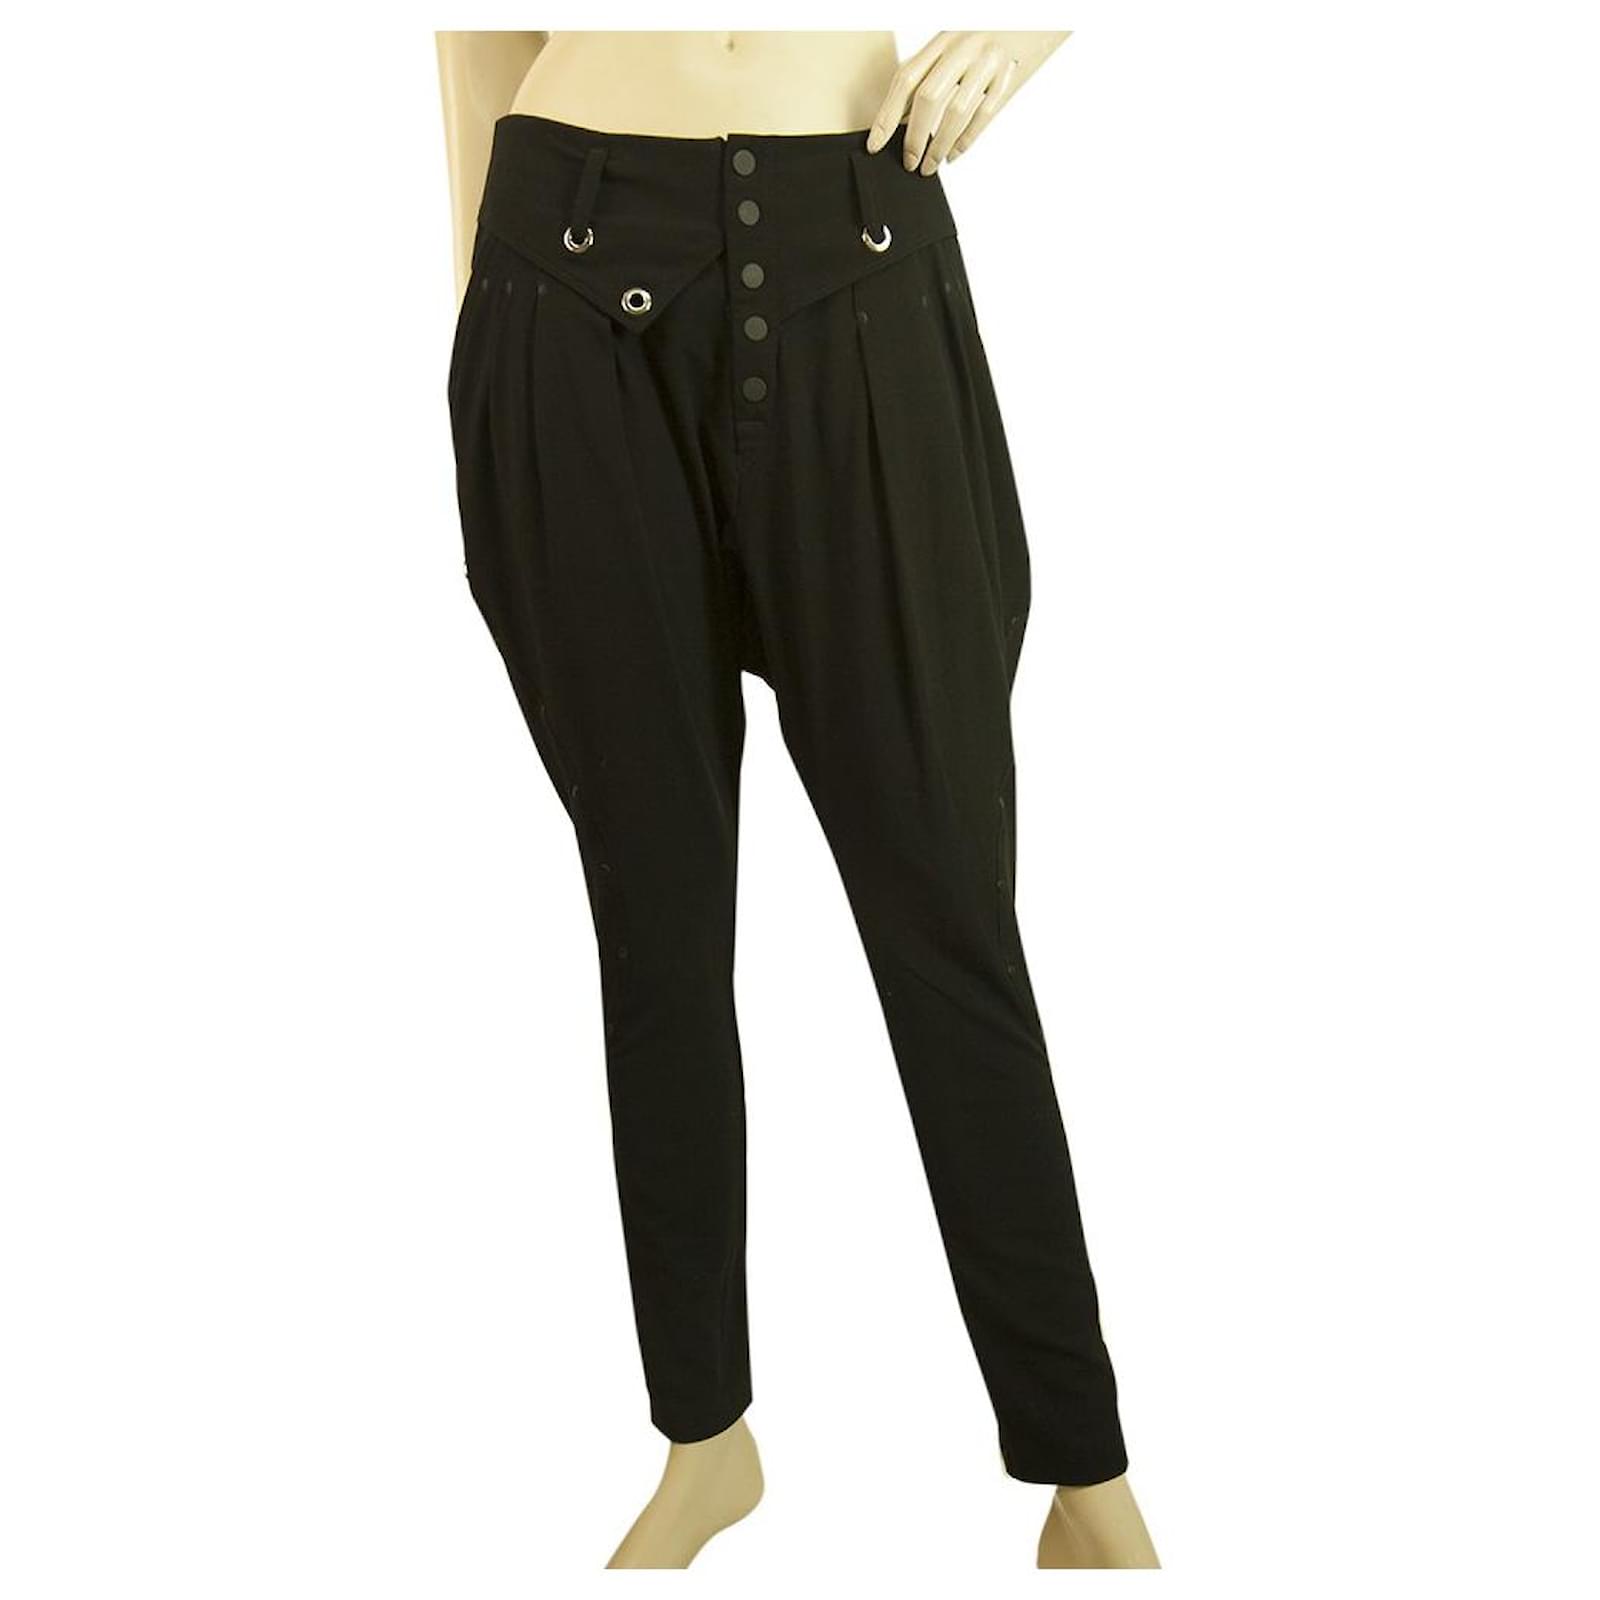 https://cdn1.jolicloset.com/imgr/full/2021/12/419426-1/polyester-black-pleated-button-front-closure-breeches-pants-trousers-size-40-it-us-4.jpg